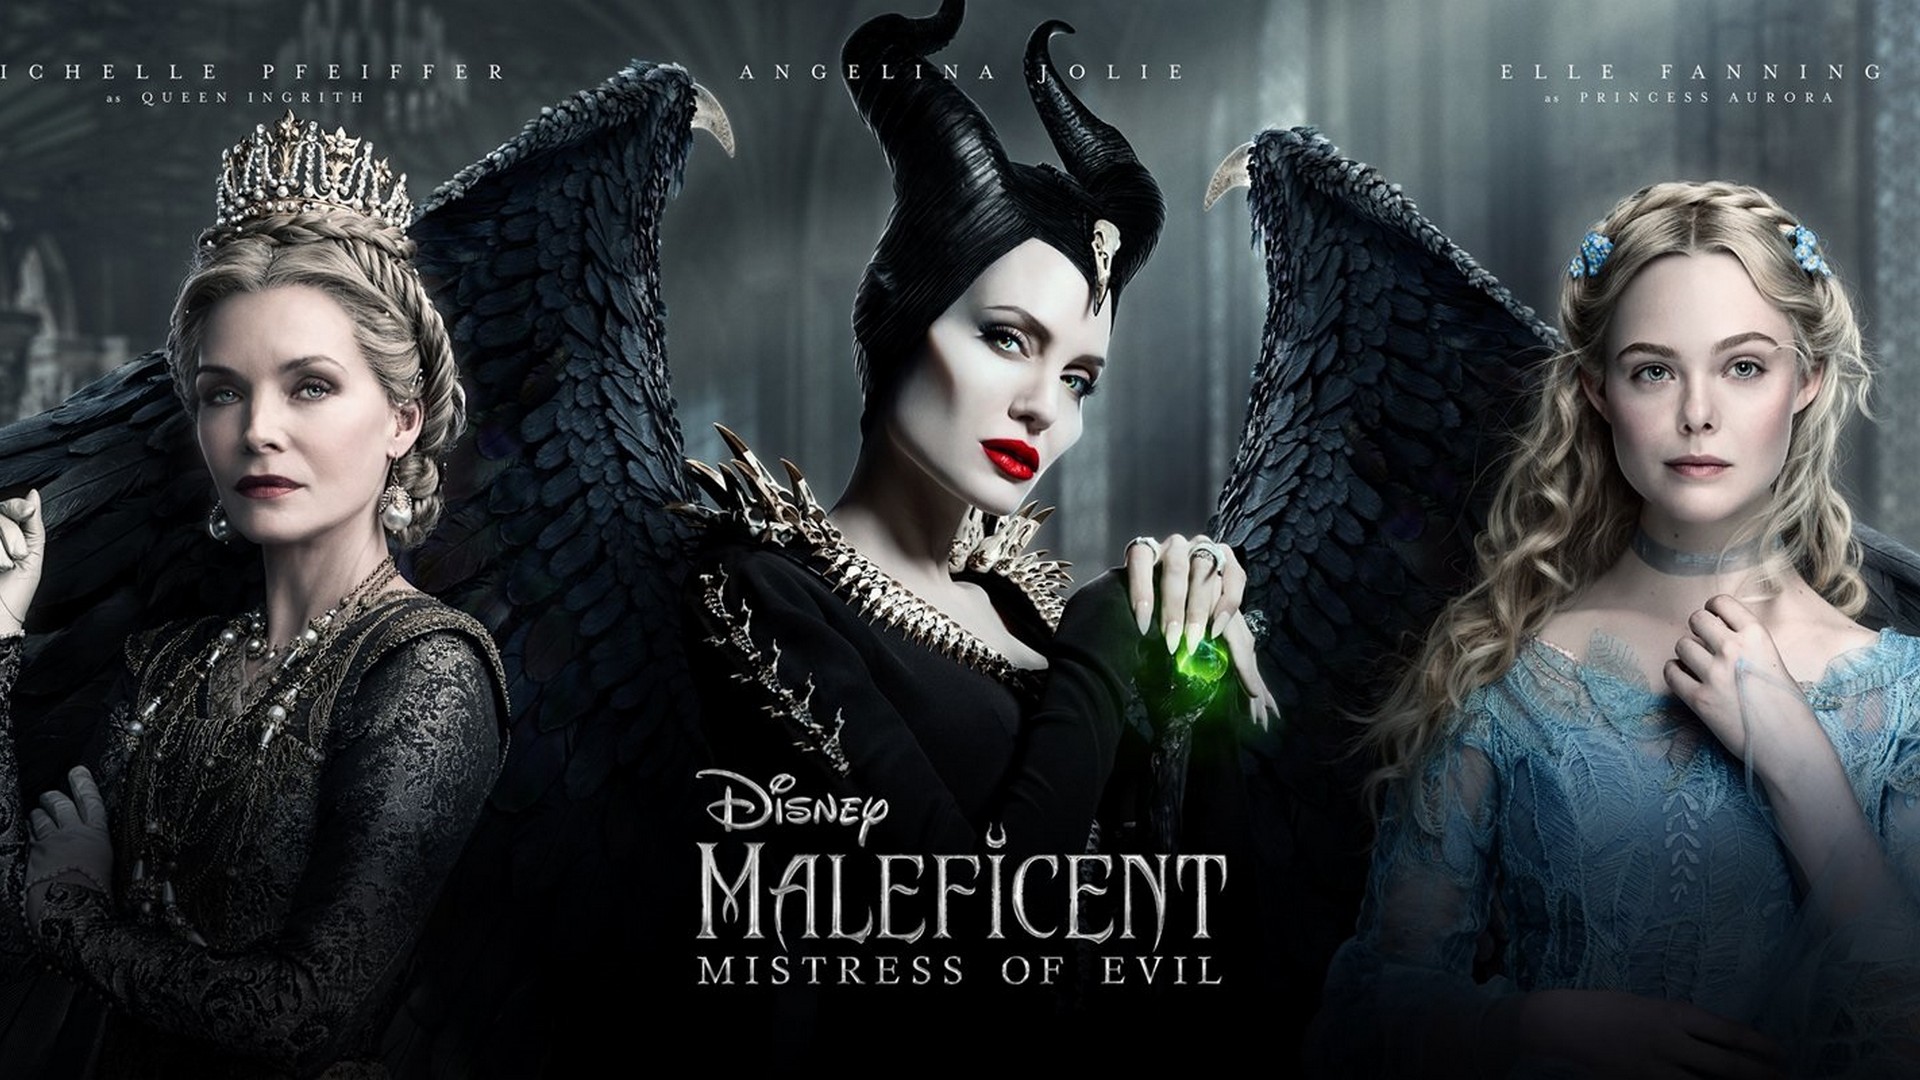 Maleficent Mistress of Evil Poster Wallpaper With high-resolution 1920X1080 pixel. You can use this poster wallpaper for your Desktop Computers, Mac Screensavers, Windows Backgrounds, iPhone Wallpapers, Tablet or Android Lock screen and another Mobile device